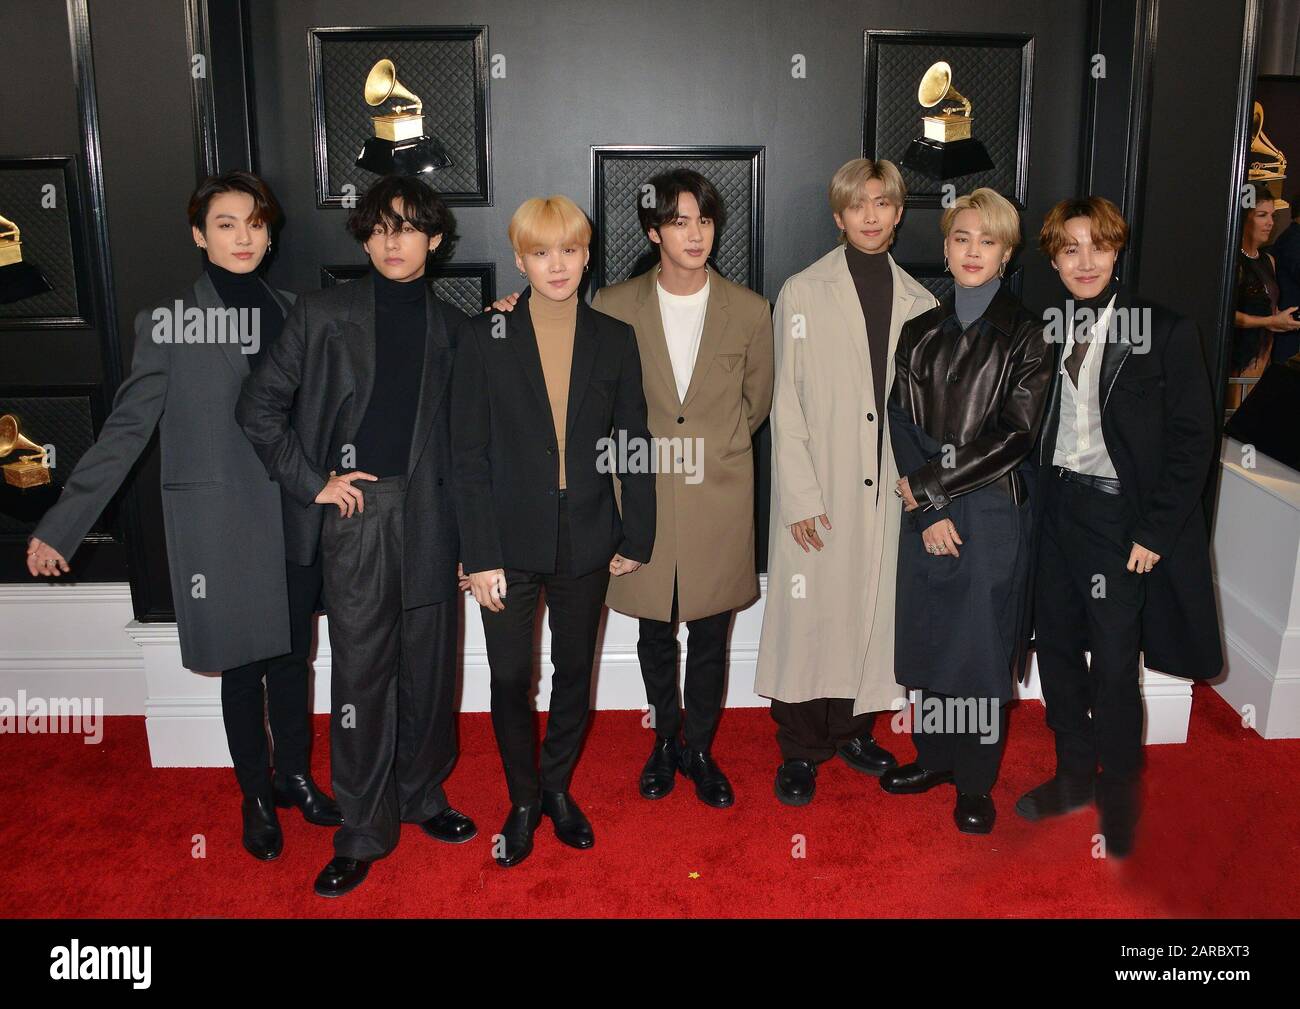 Los Angeles, CA. 26th Jan, 2020. RM, V, Suga, Jin, Jimin, Jungkook, J-Hope, of music group BTS 107 at arrivals for 62nd Annual Grammy Awards - Arrivals 2, STAPLES Center, Los Angeles, CA January 26, 2020. Credit: Tsuni/Everett Collection/Alamy Live News Stock Photo